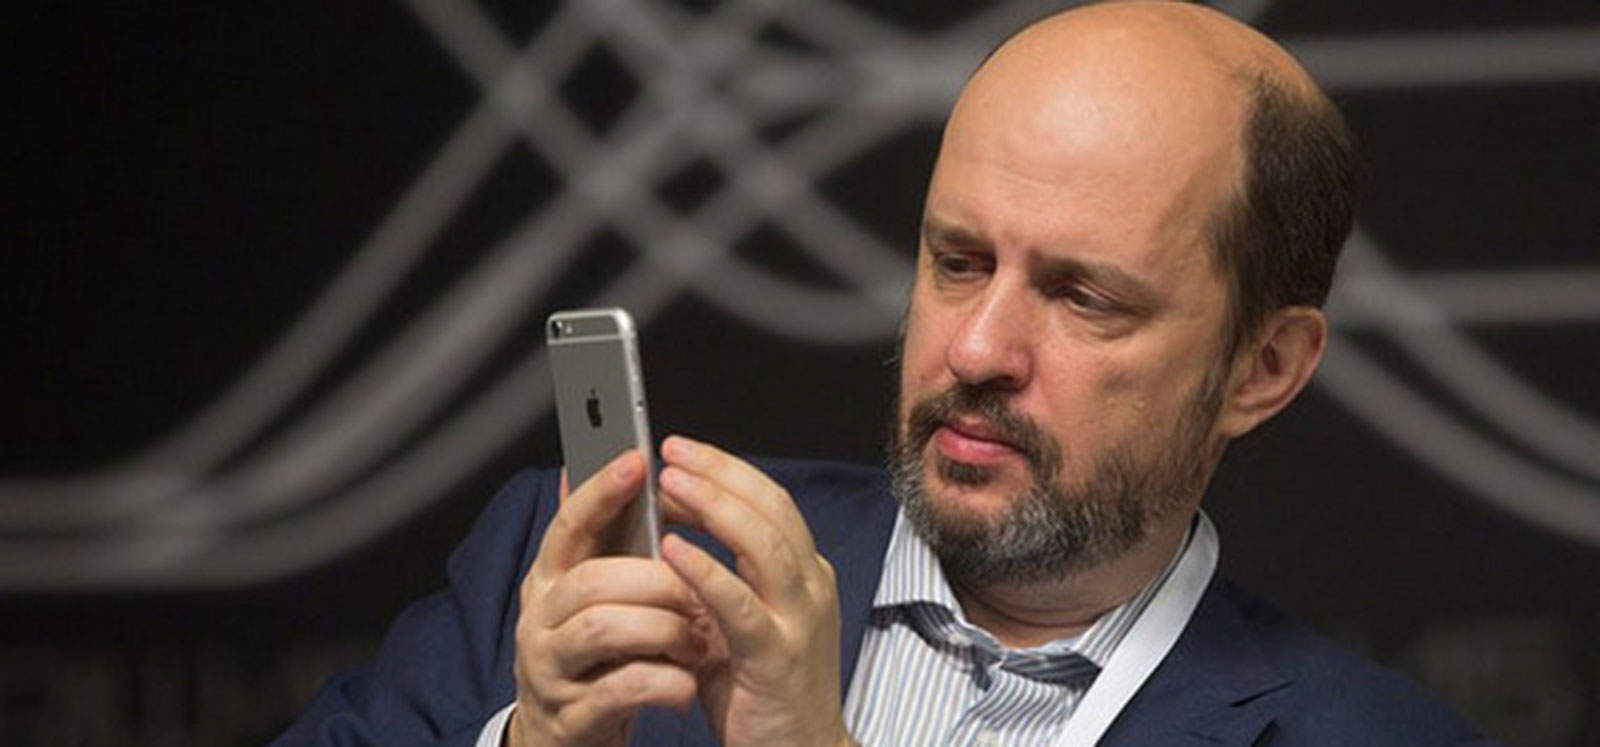 German Klimenko wants Apple and other U.S. tech companies to pay more taxes.